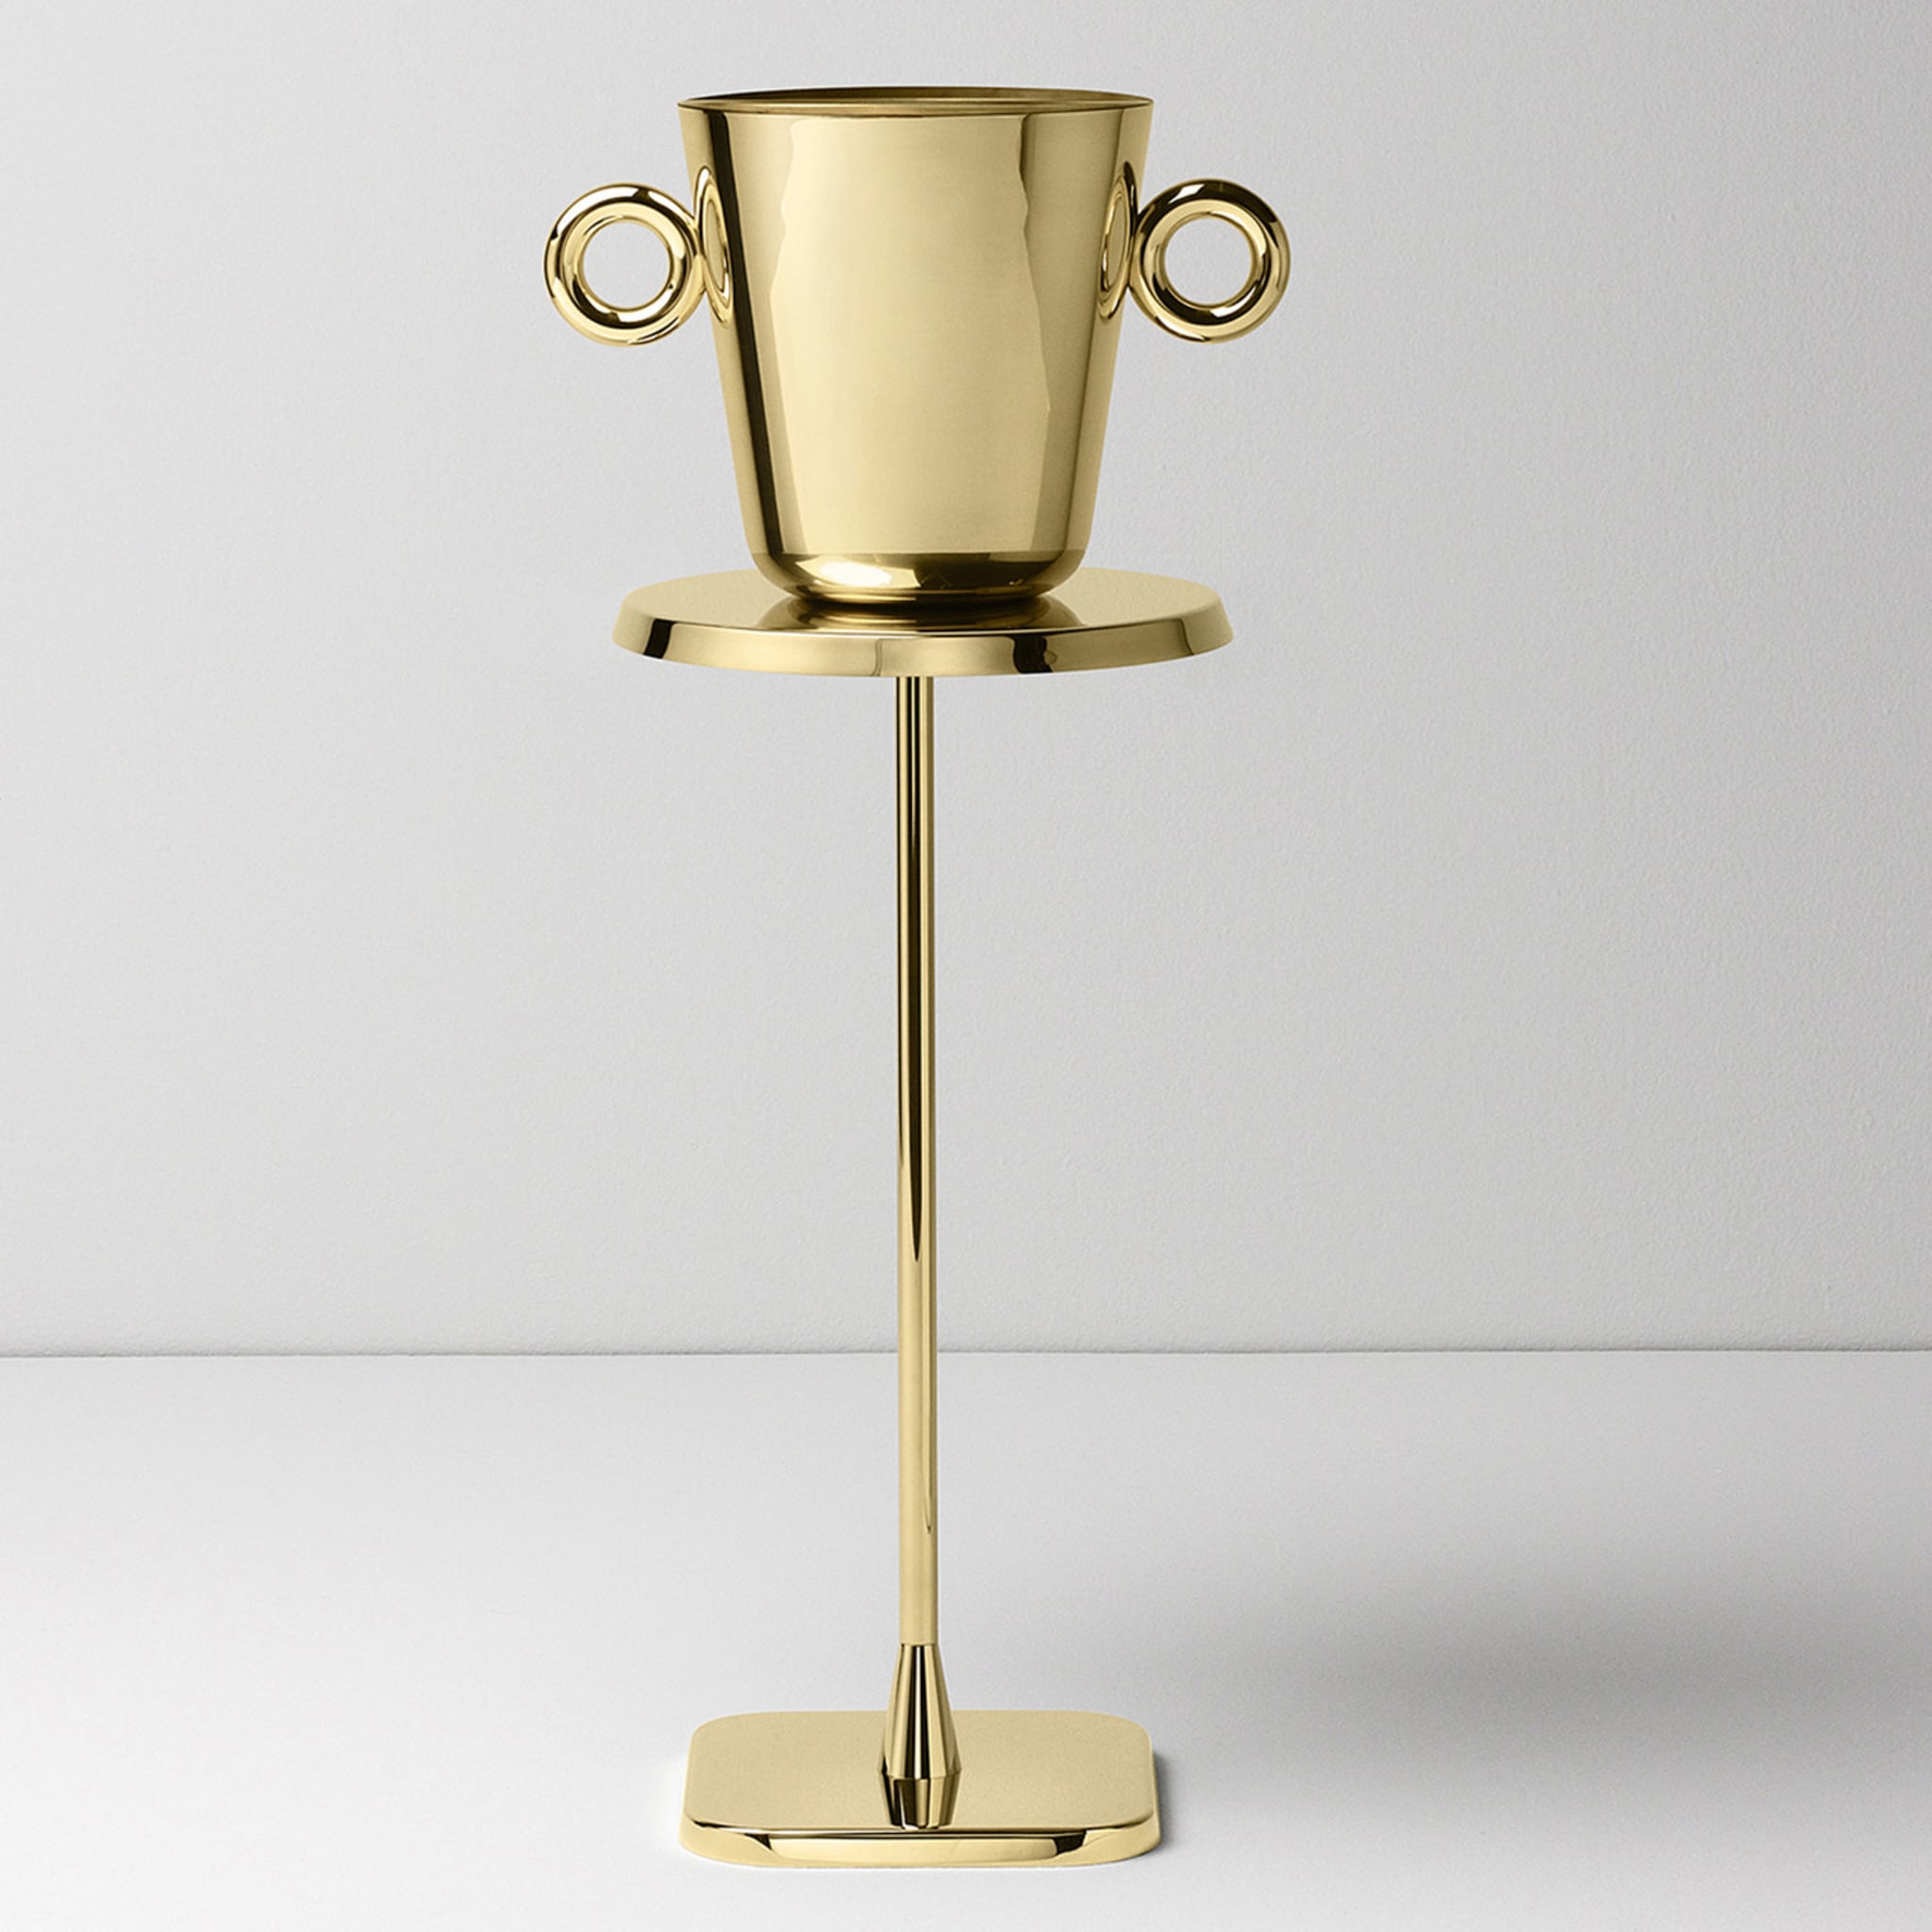 Double O Ice Bucket in Polished Brass Finish By Richard Hutten - Alternative view 2